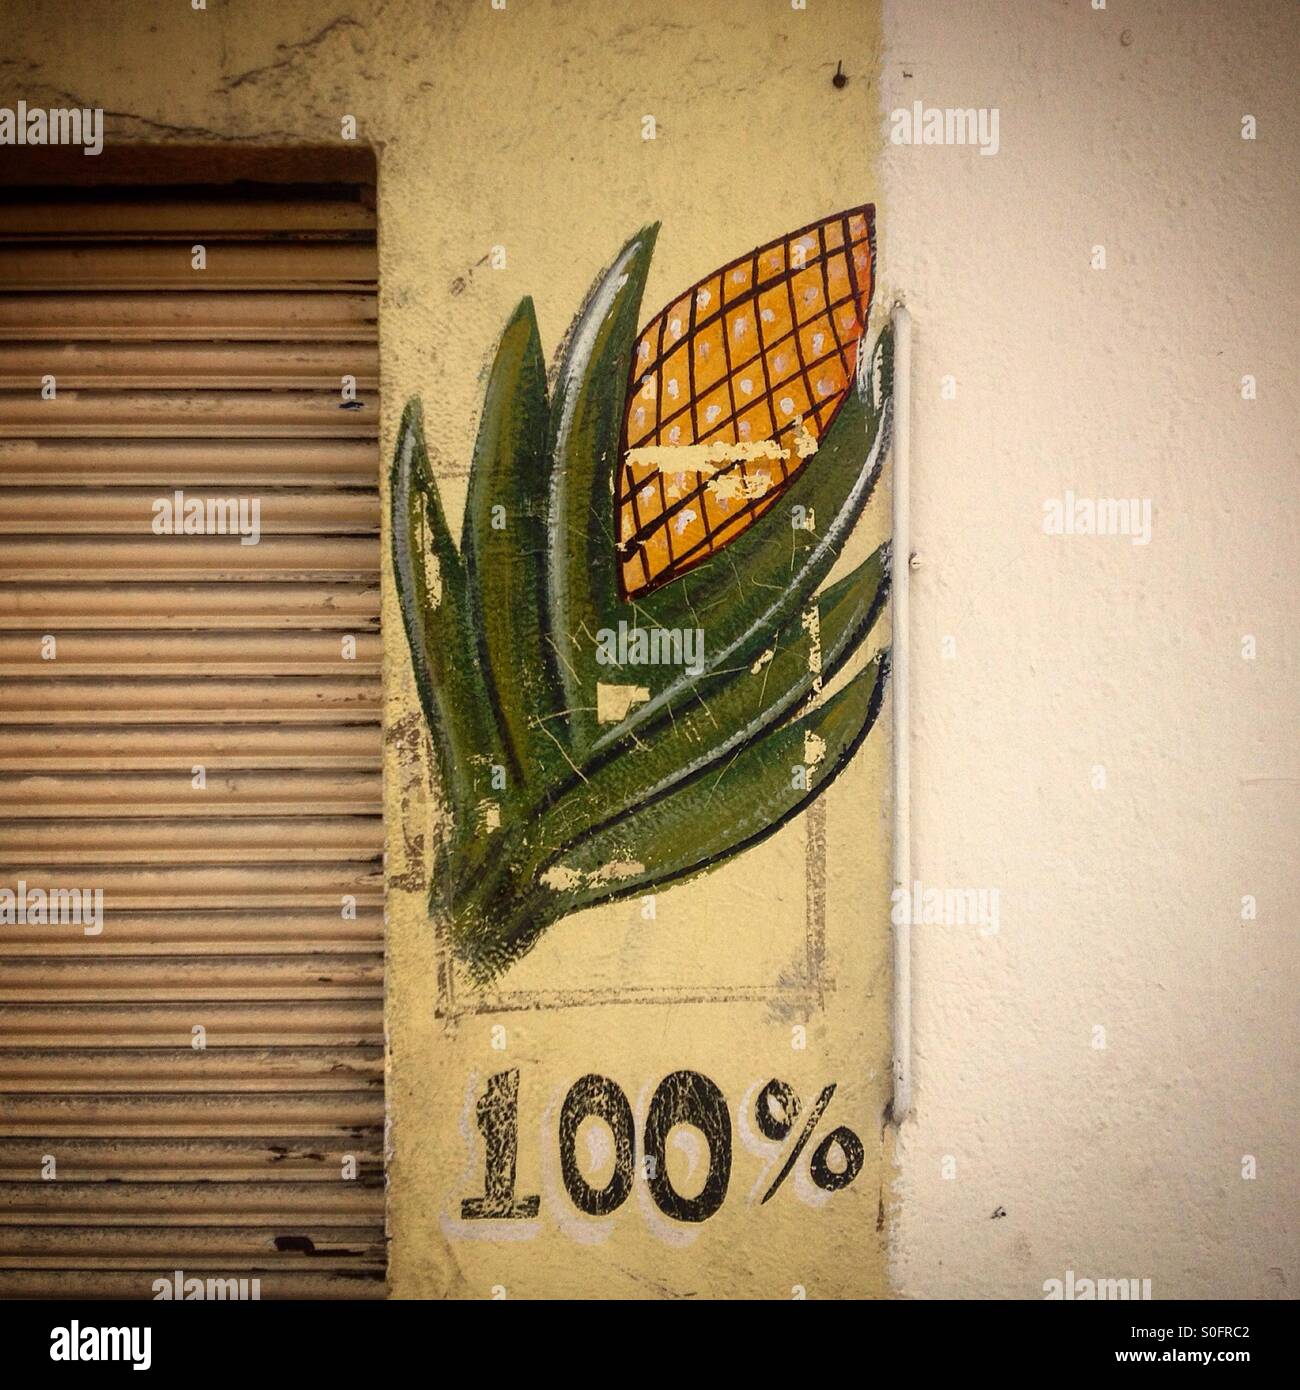 A mural with a painted corn cob and a 100% sign decorates a wall in Colonia Roma, Mexico City,Mexico Stock Photo